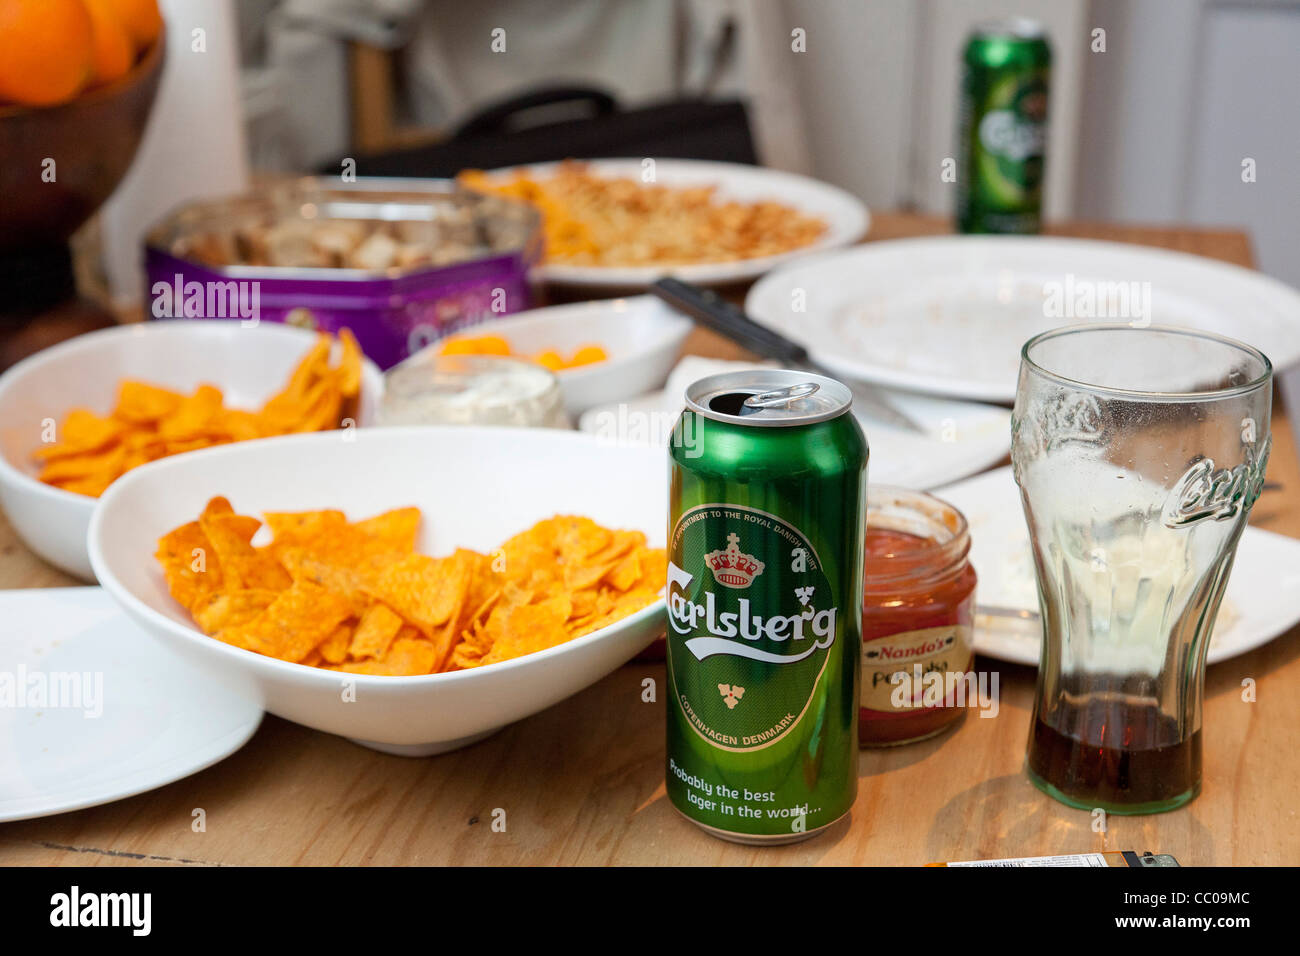 food and alcoholic drinks on table in the UK Stock Photo